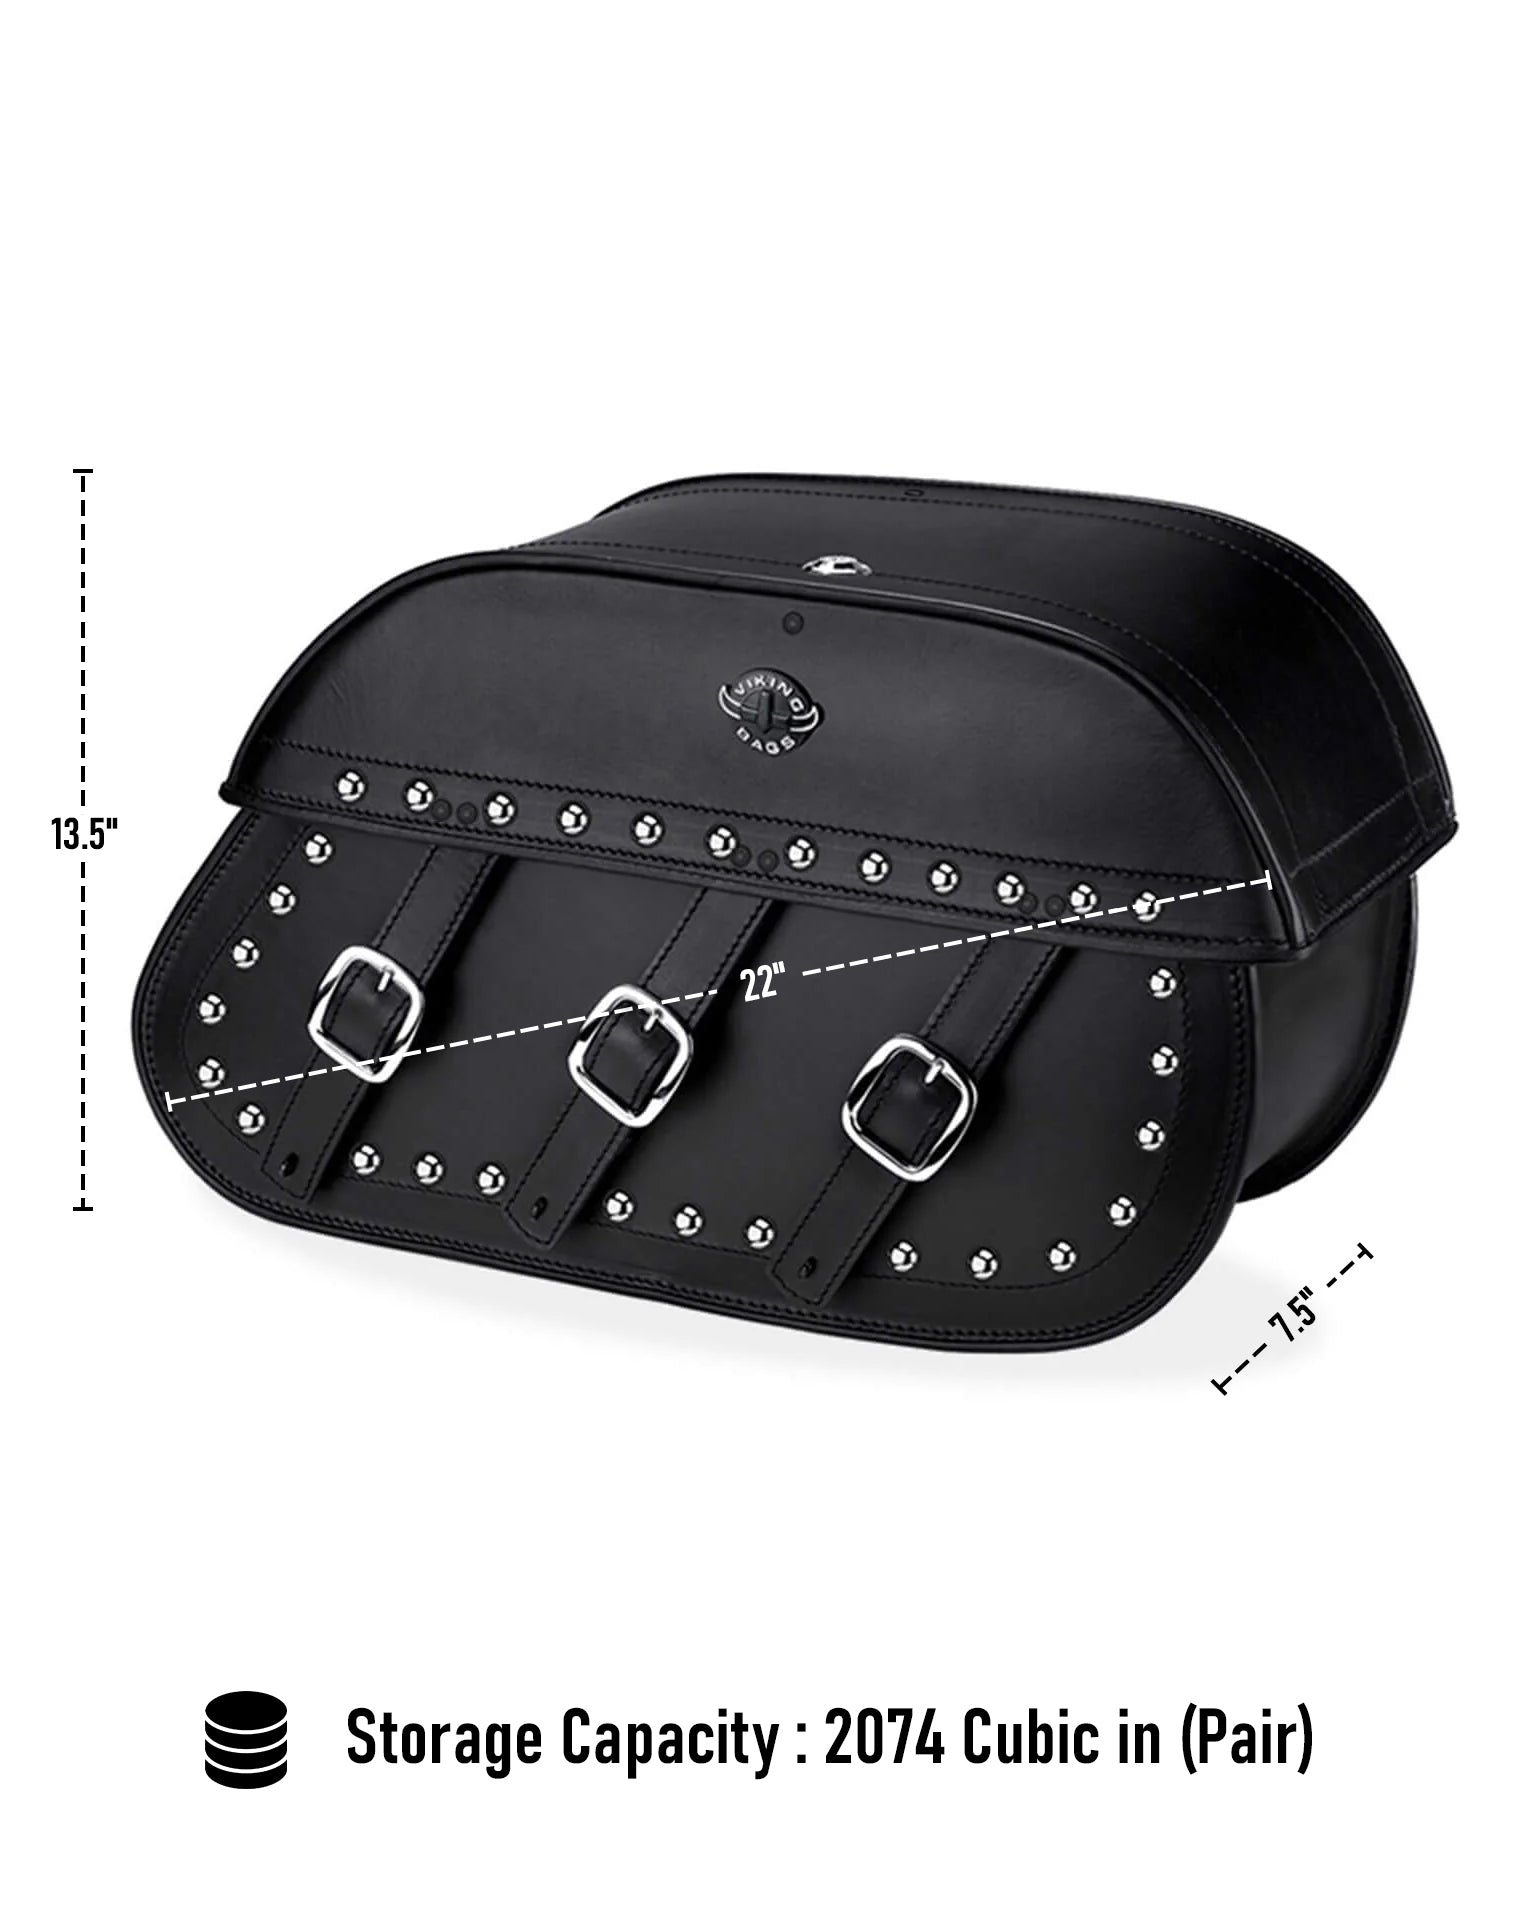 Viking Trianon Extra Large Studded Leather Motorcycle Saddlebags For Harley Softail Fat Boy Lo Flstfb Can Store Your Ridings Gears